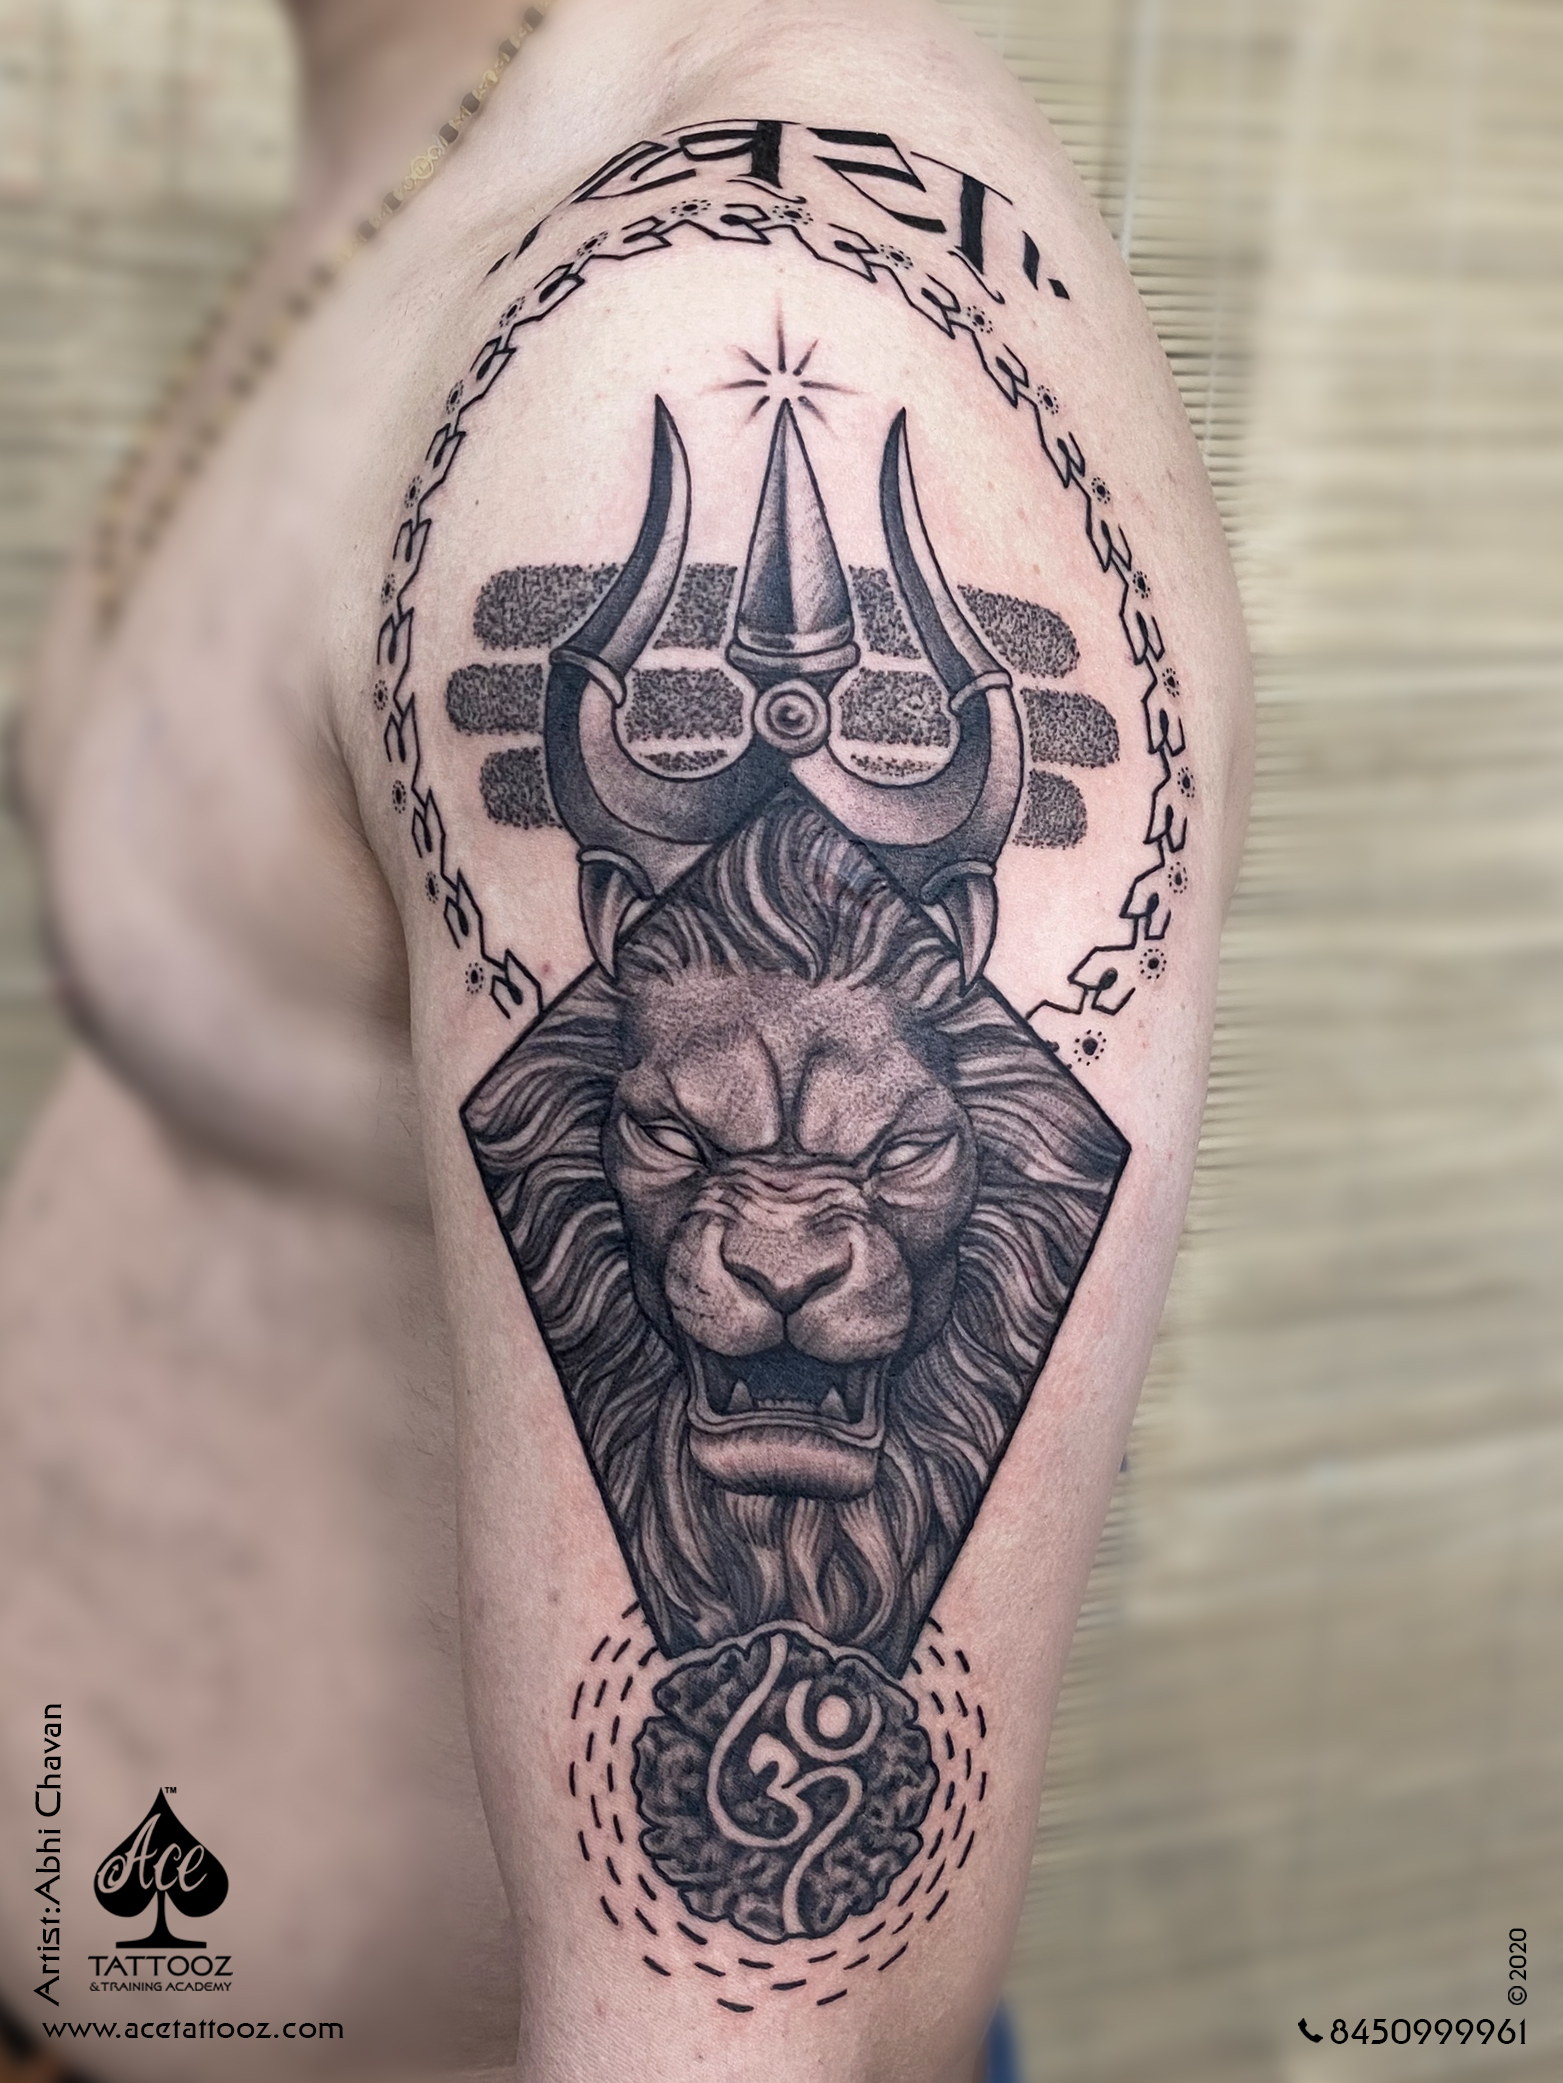 Scar Tattoo from Red Wing Tattoo in Winona, MN